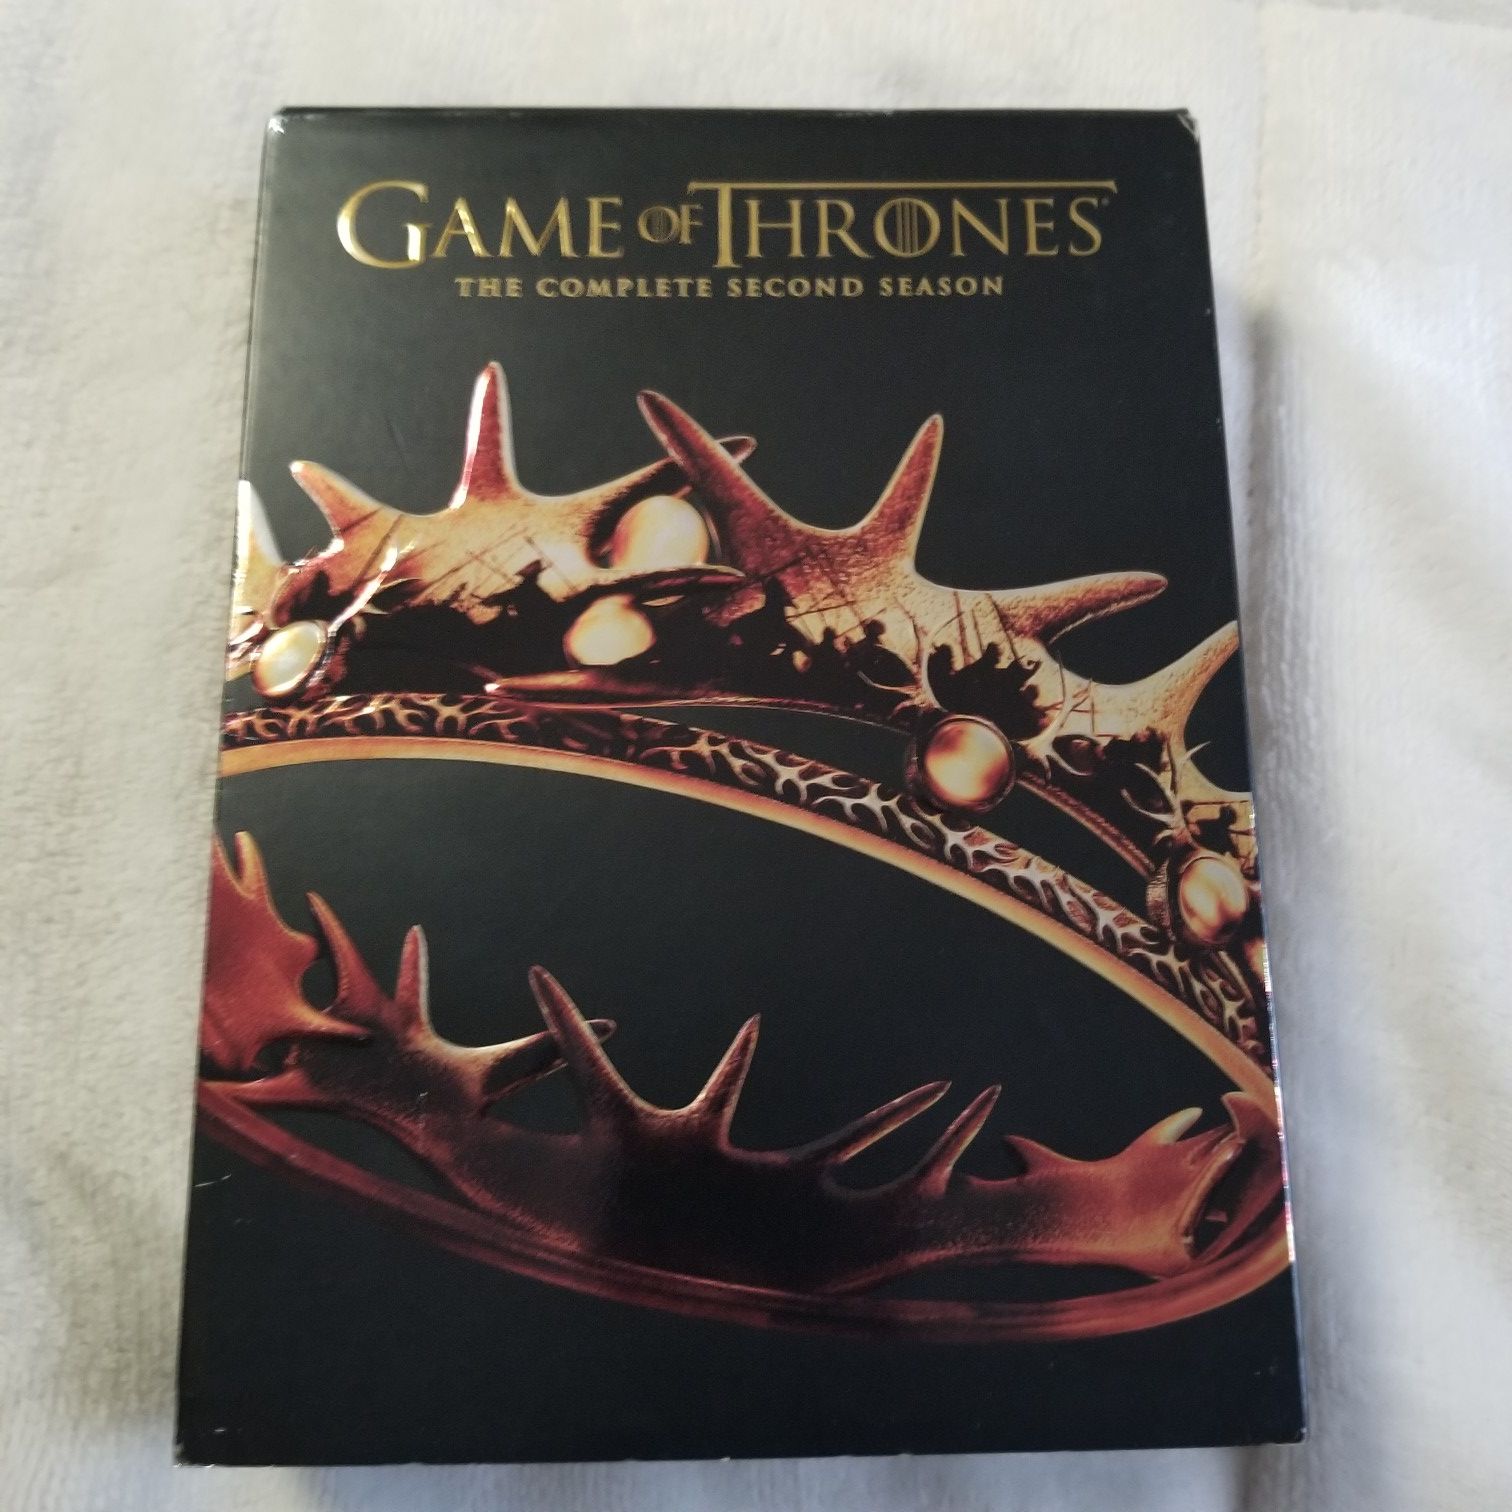 Game of Thrones complete 2nd season